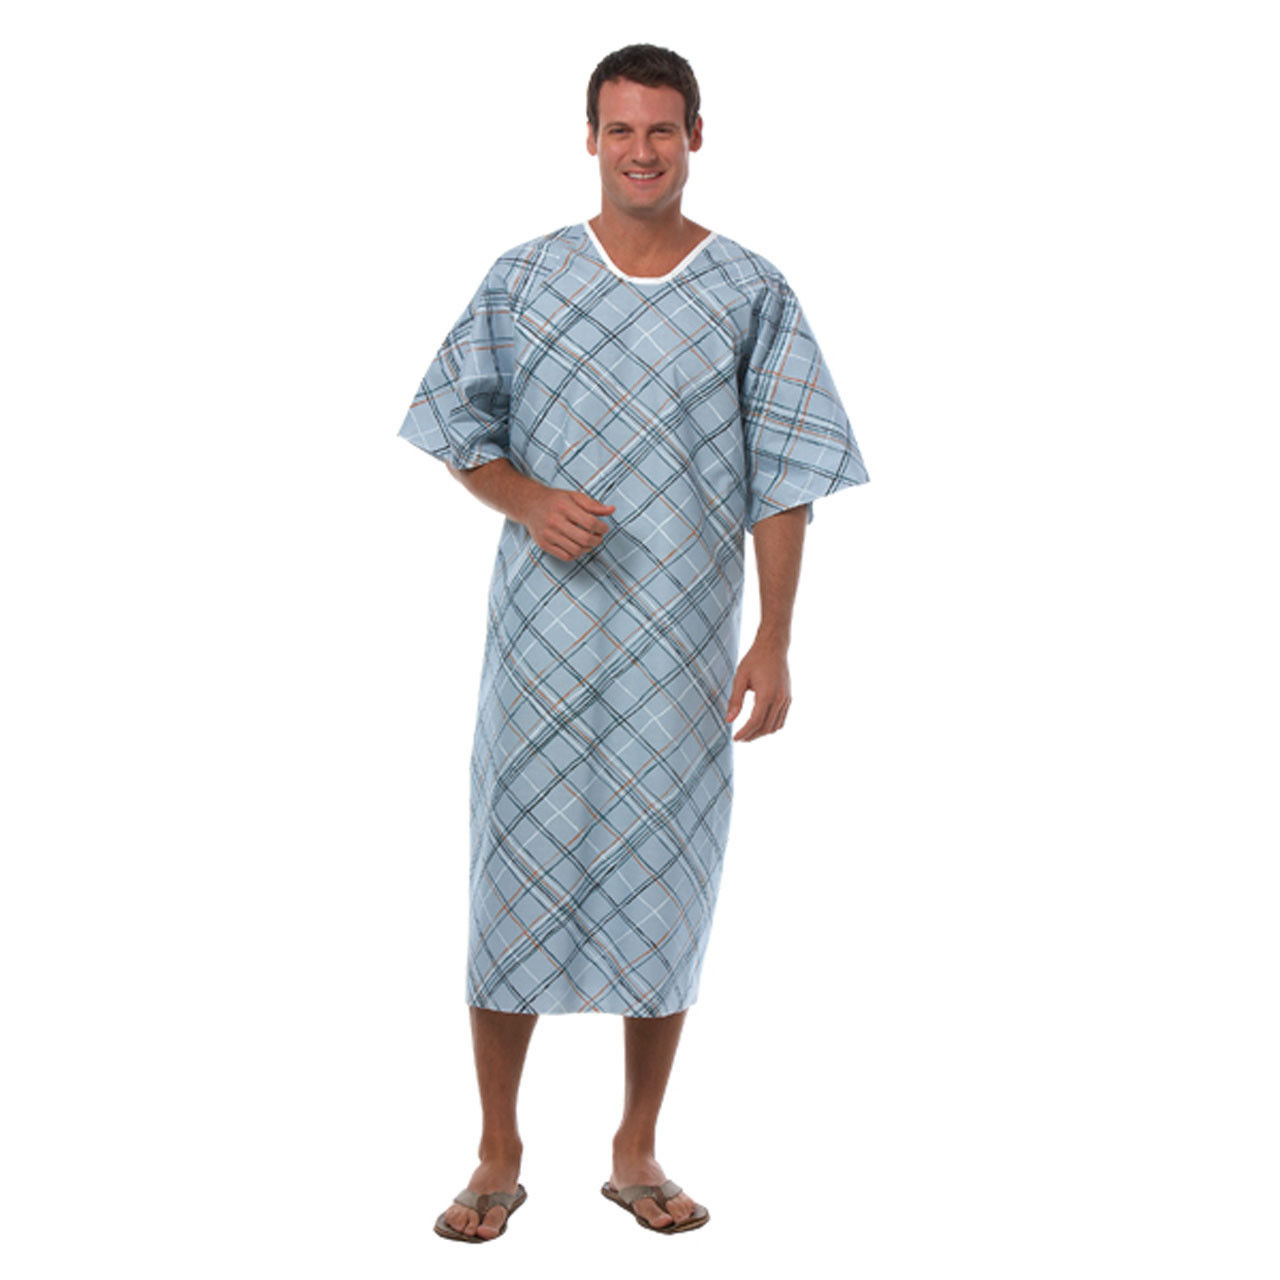 Does the case of these blue medical gowns include multiple pieces?